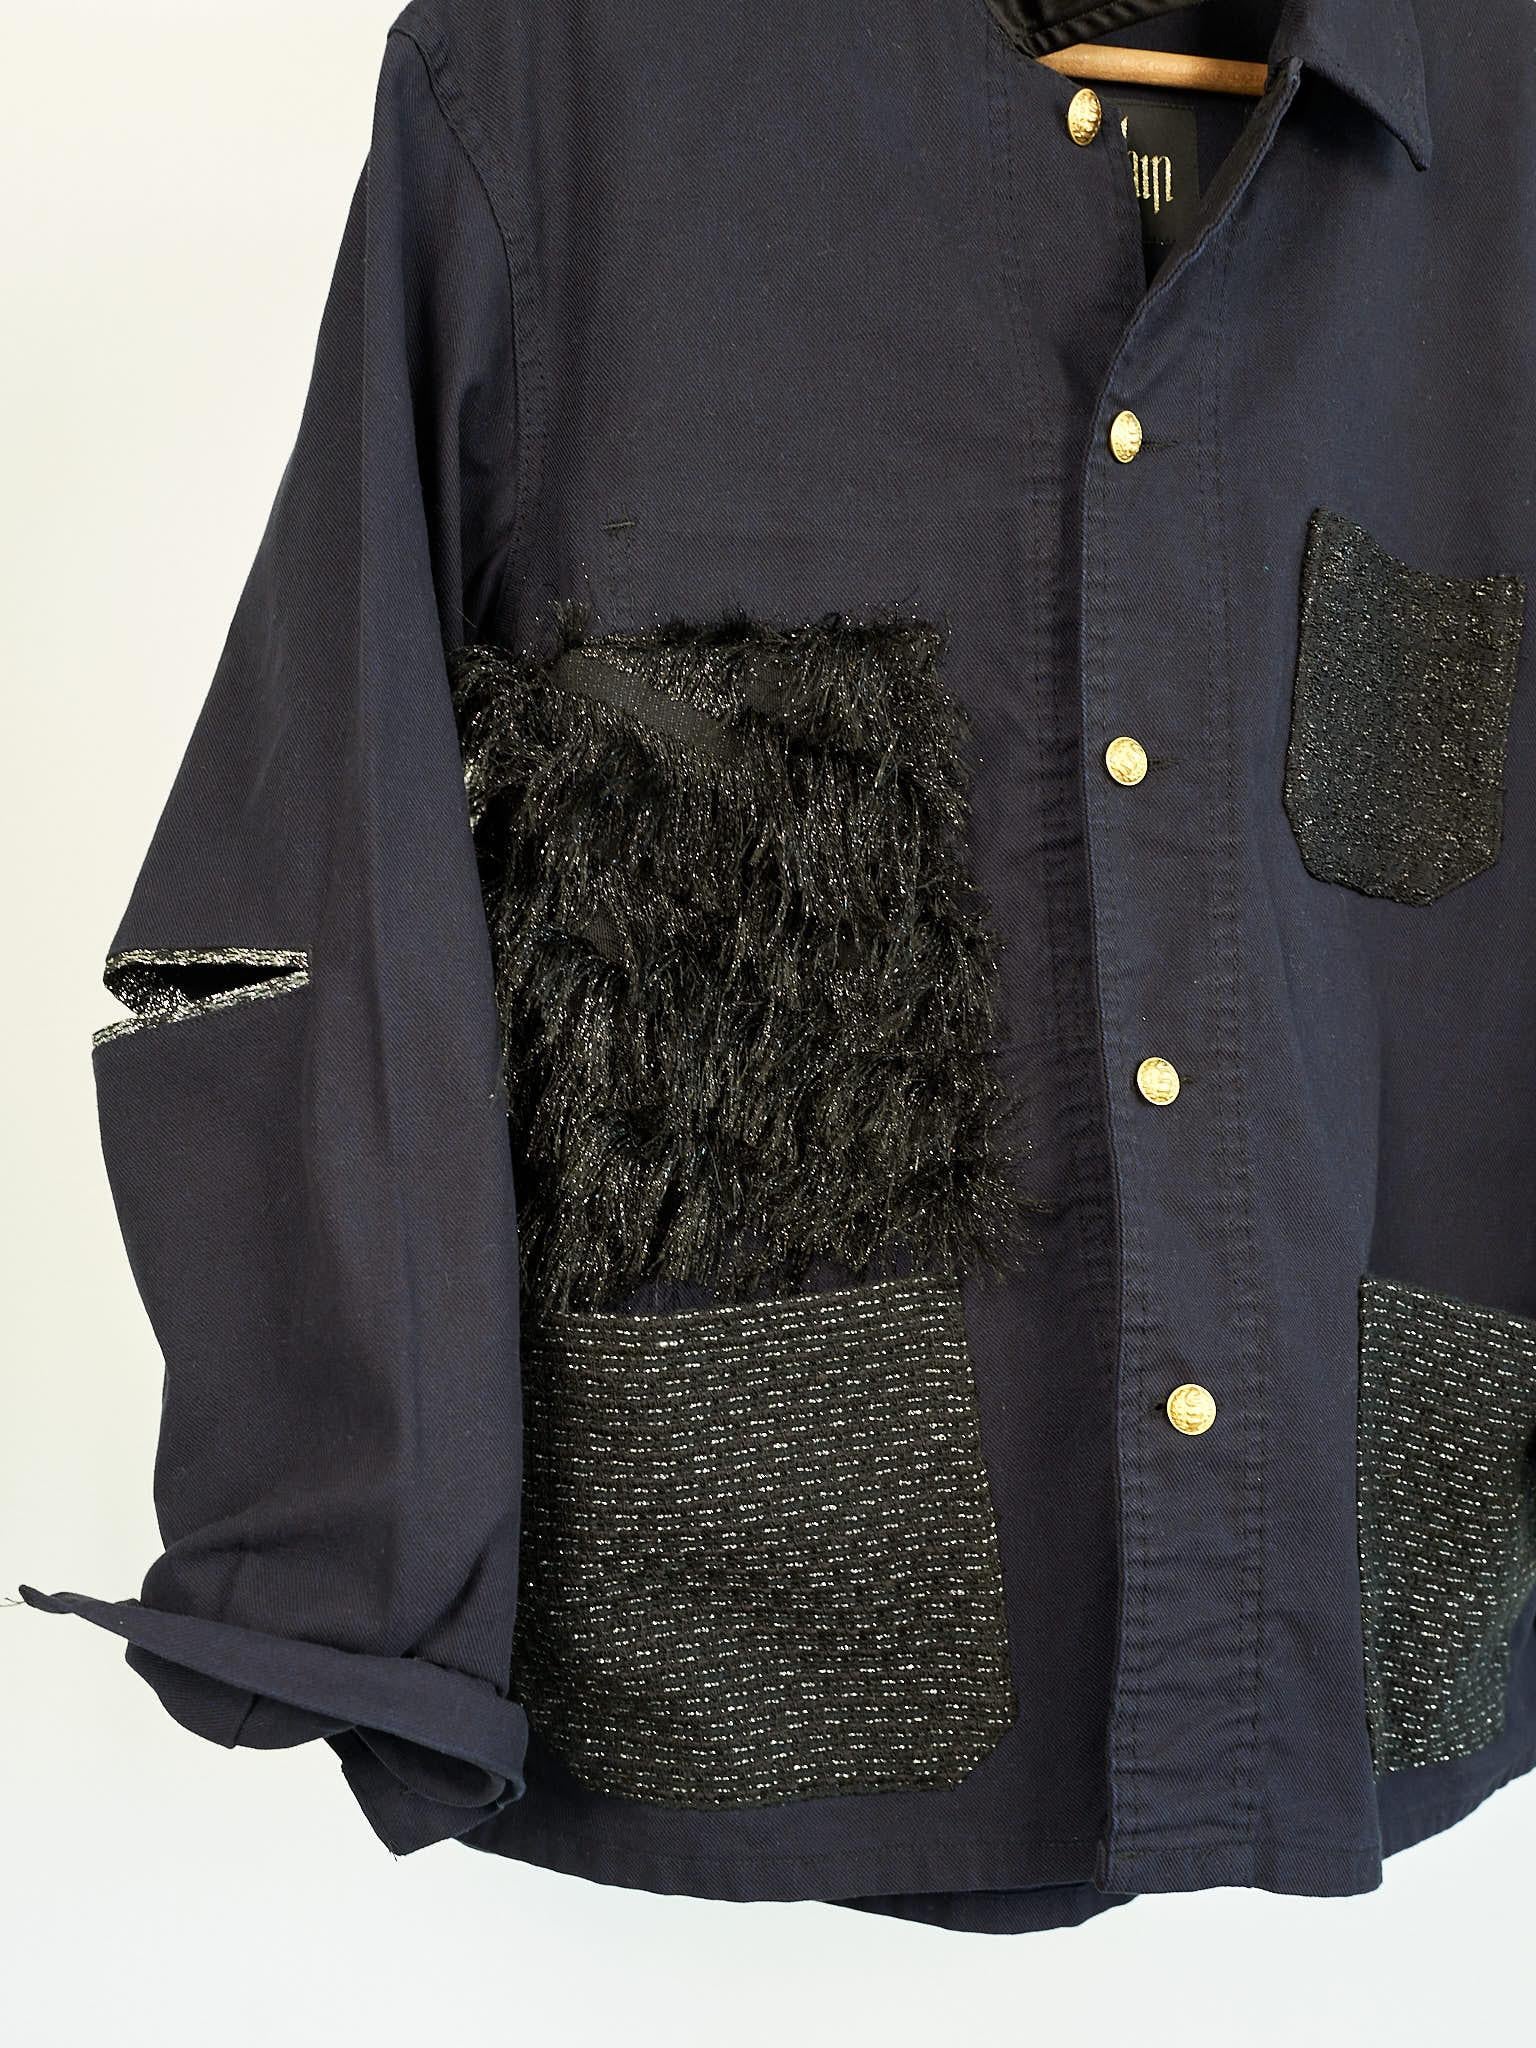 Repurposed Vintage Jacket French Work Midnight Blue with Black Lurex Tweed Pockets, Black Fringes as a side patch. Open elbows.
Size: L / FR 42 / IT 44 / EU 40 / UK 12

Designer: J Dauphin
Sustainable Luxury, Collectible Vintage Upcycled and